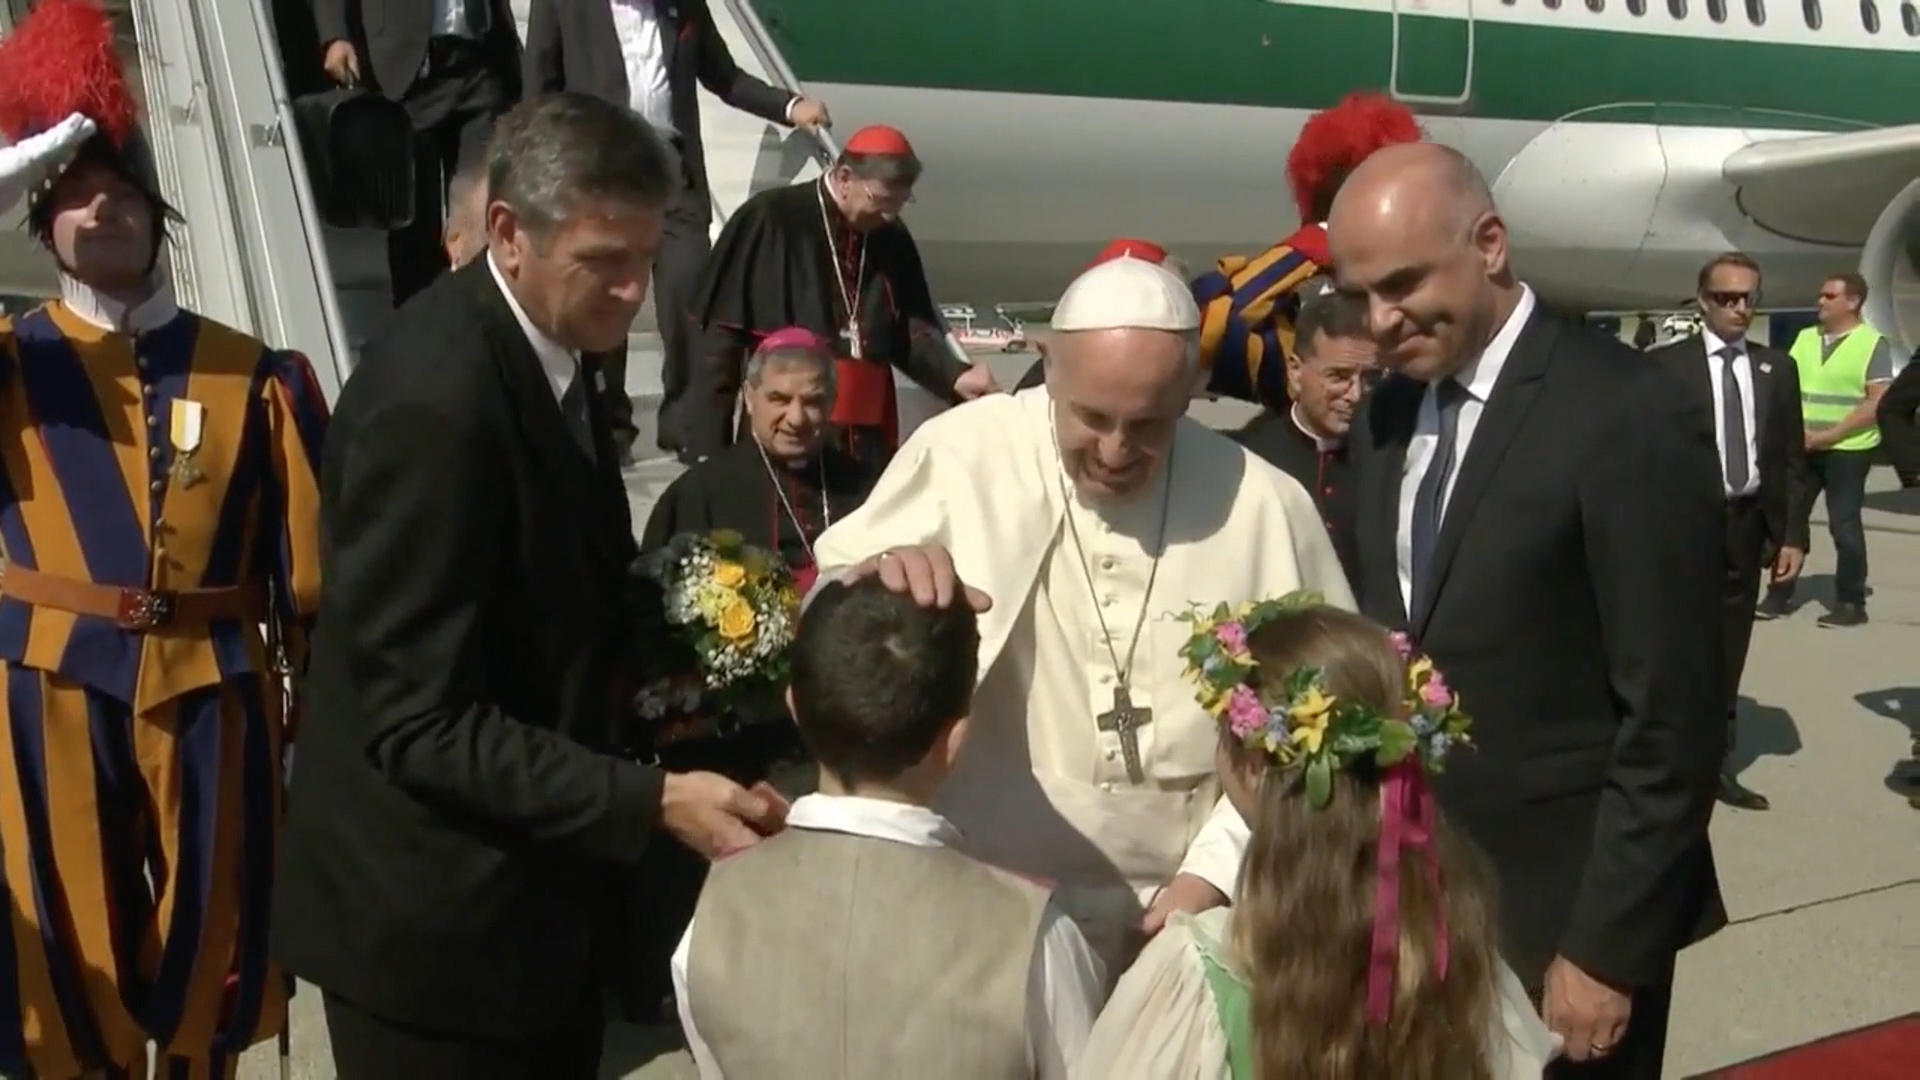 Swiss President with the pope